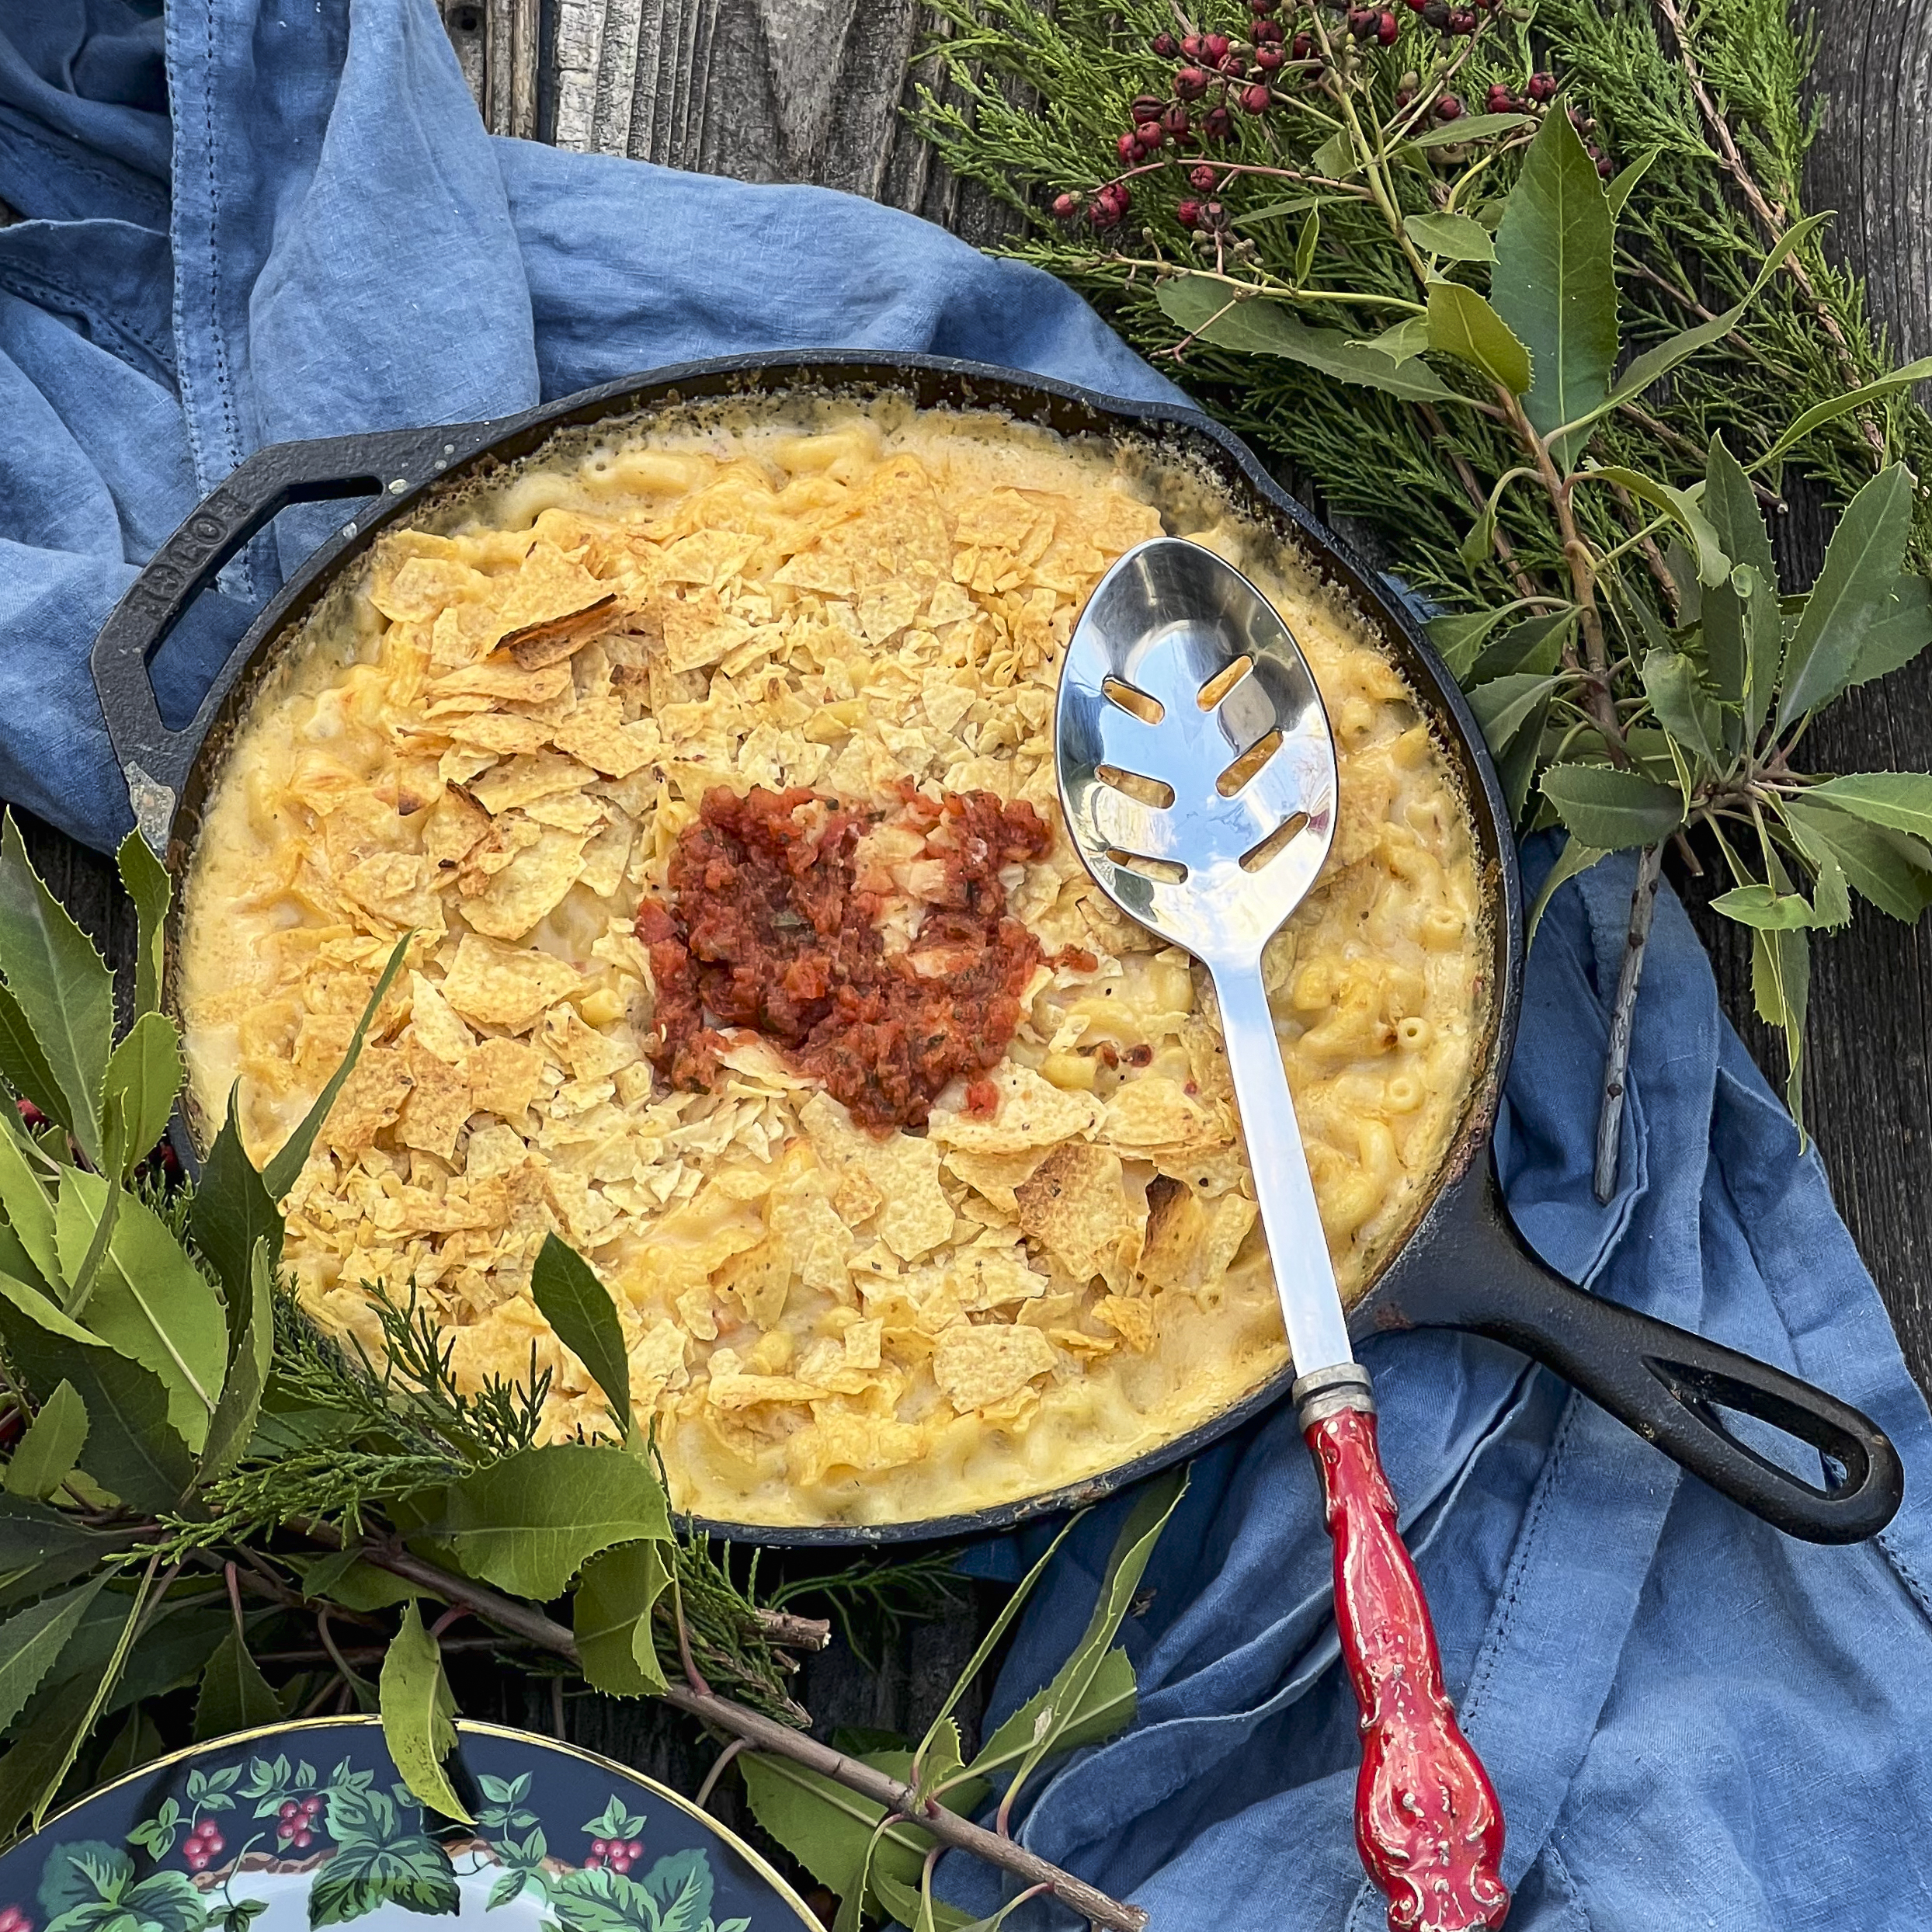 Smoked Mac and Cheese is in a cast iron skillet and served with a large red handle spoon.